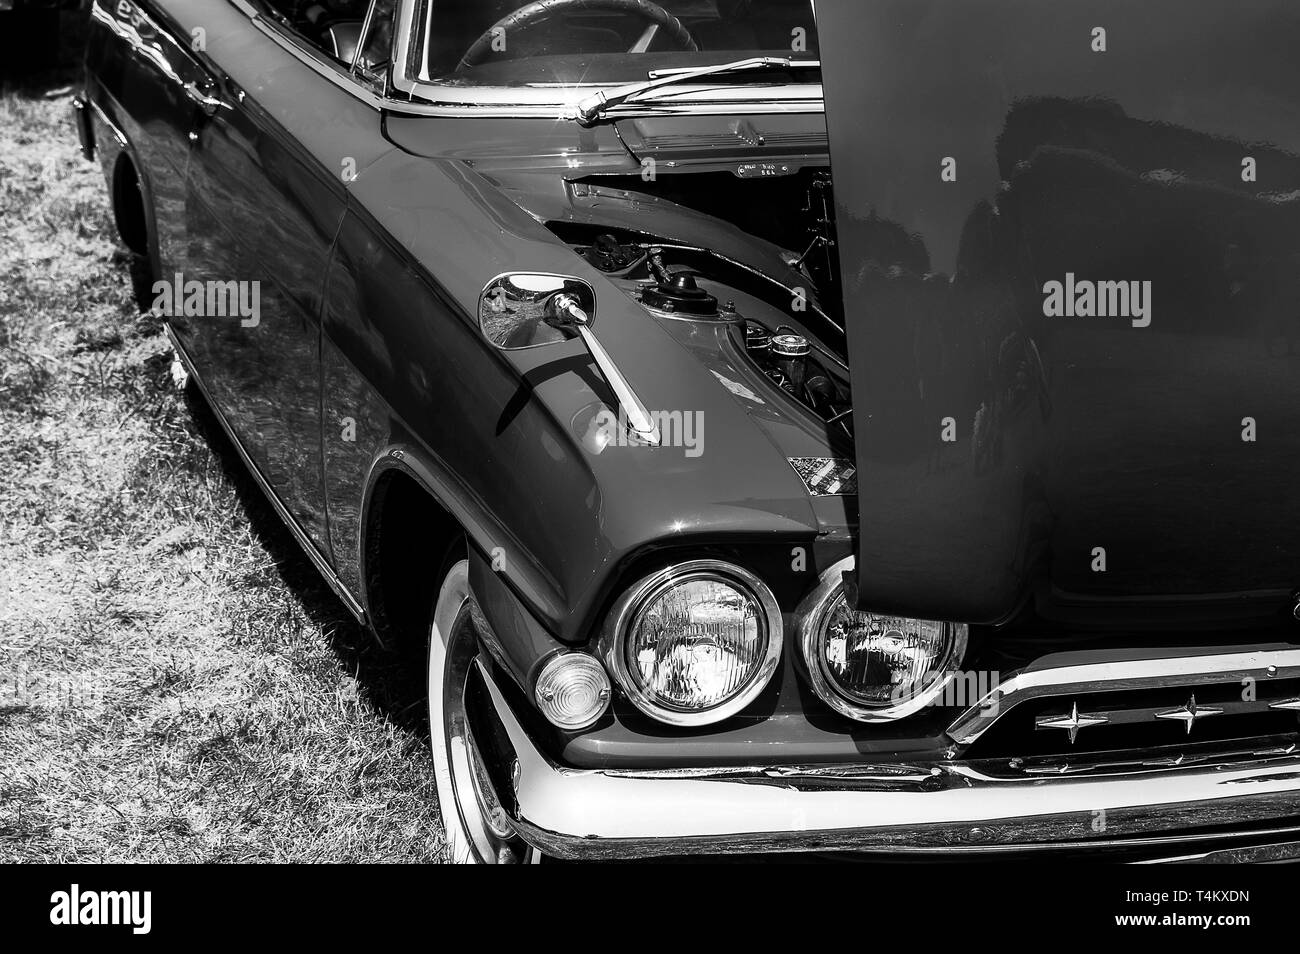 A 1960's Ford Consul Classic on display at a car show Stock Photo